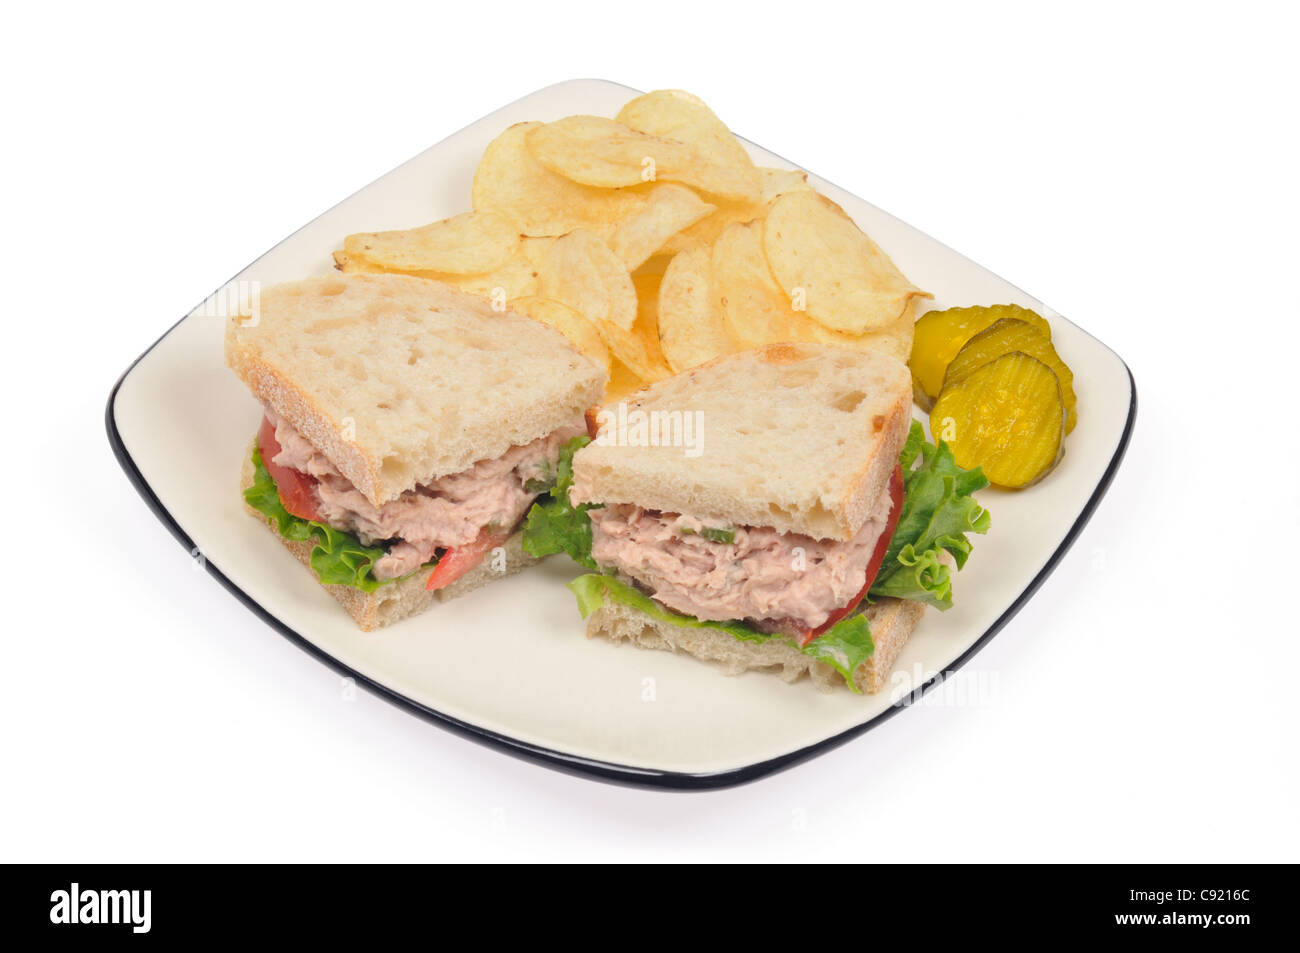 Tuna mayo sandwich on white bread with lettuce, tomato, chips or crisps and pickles on white background. Stock Photo